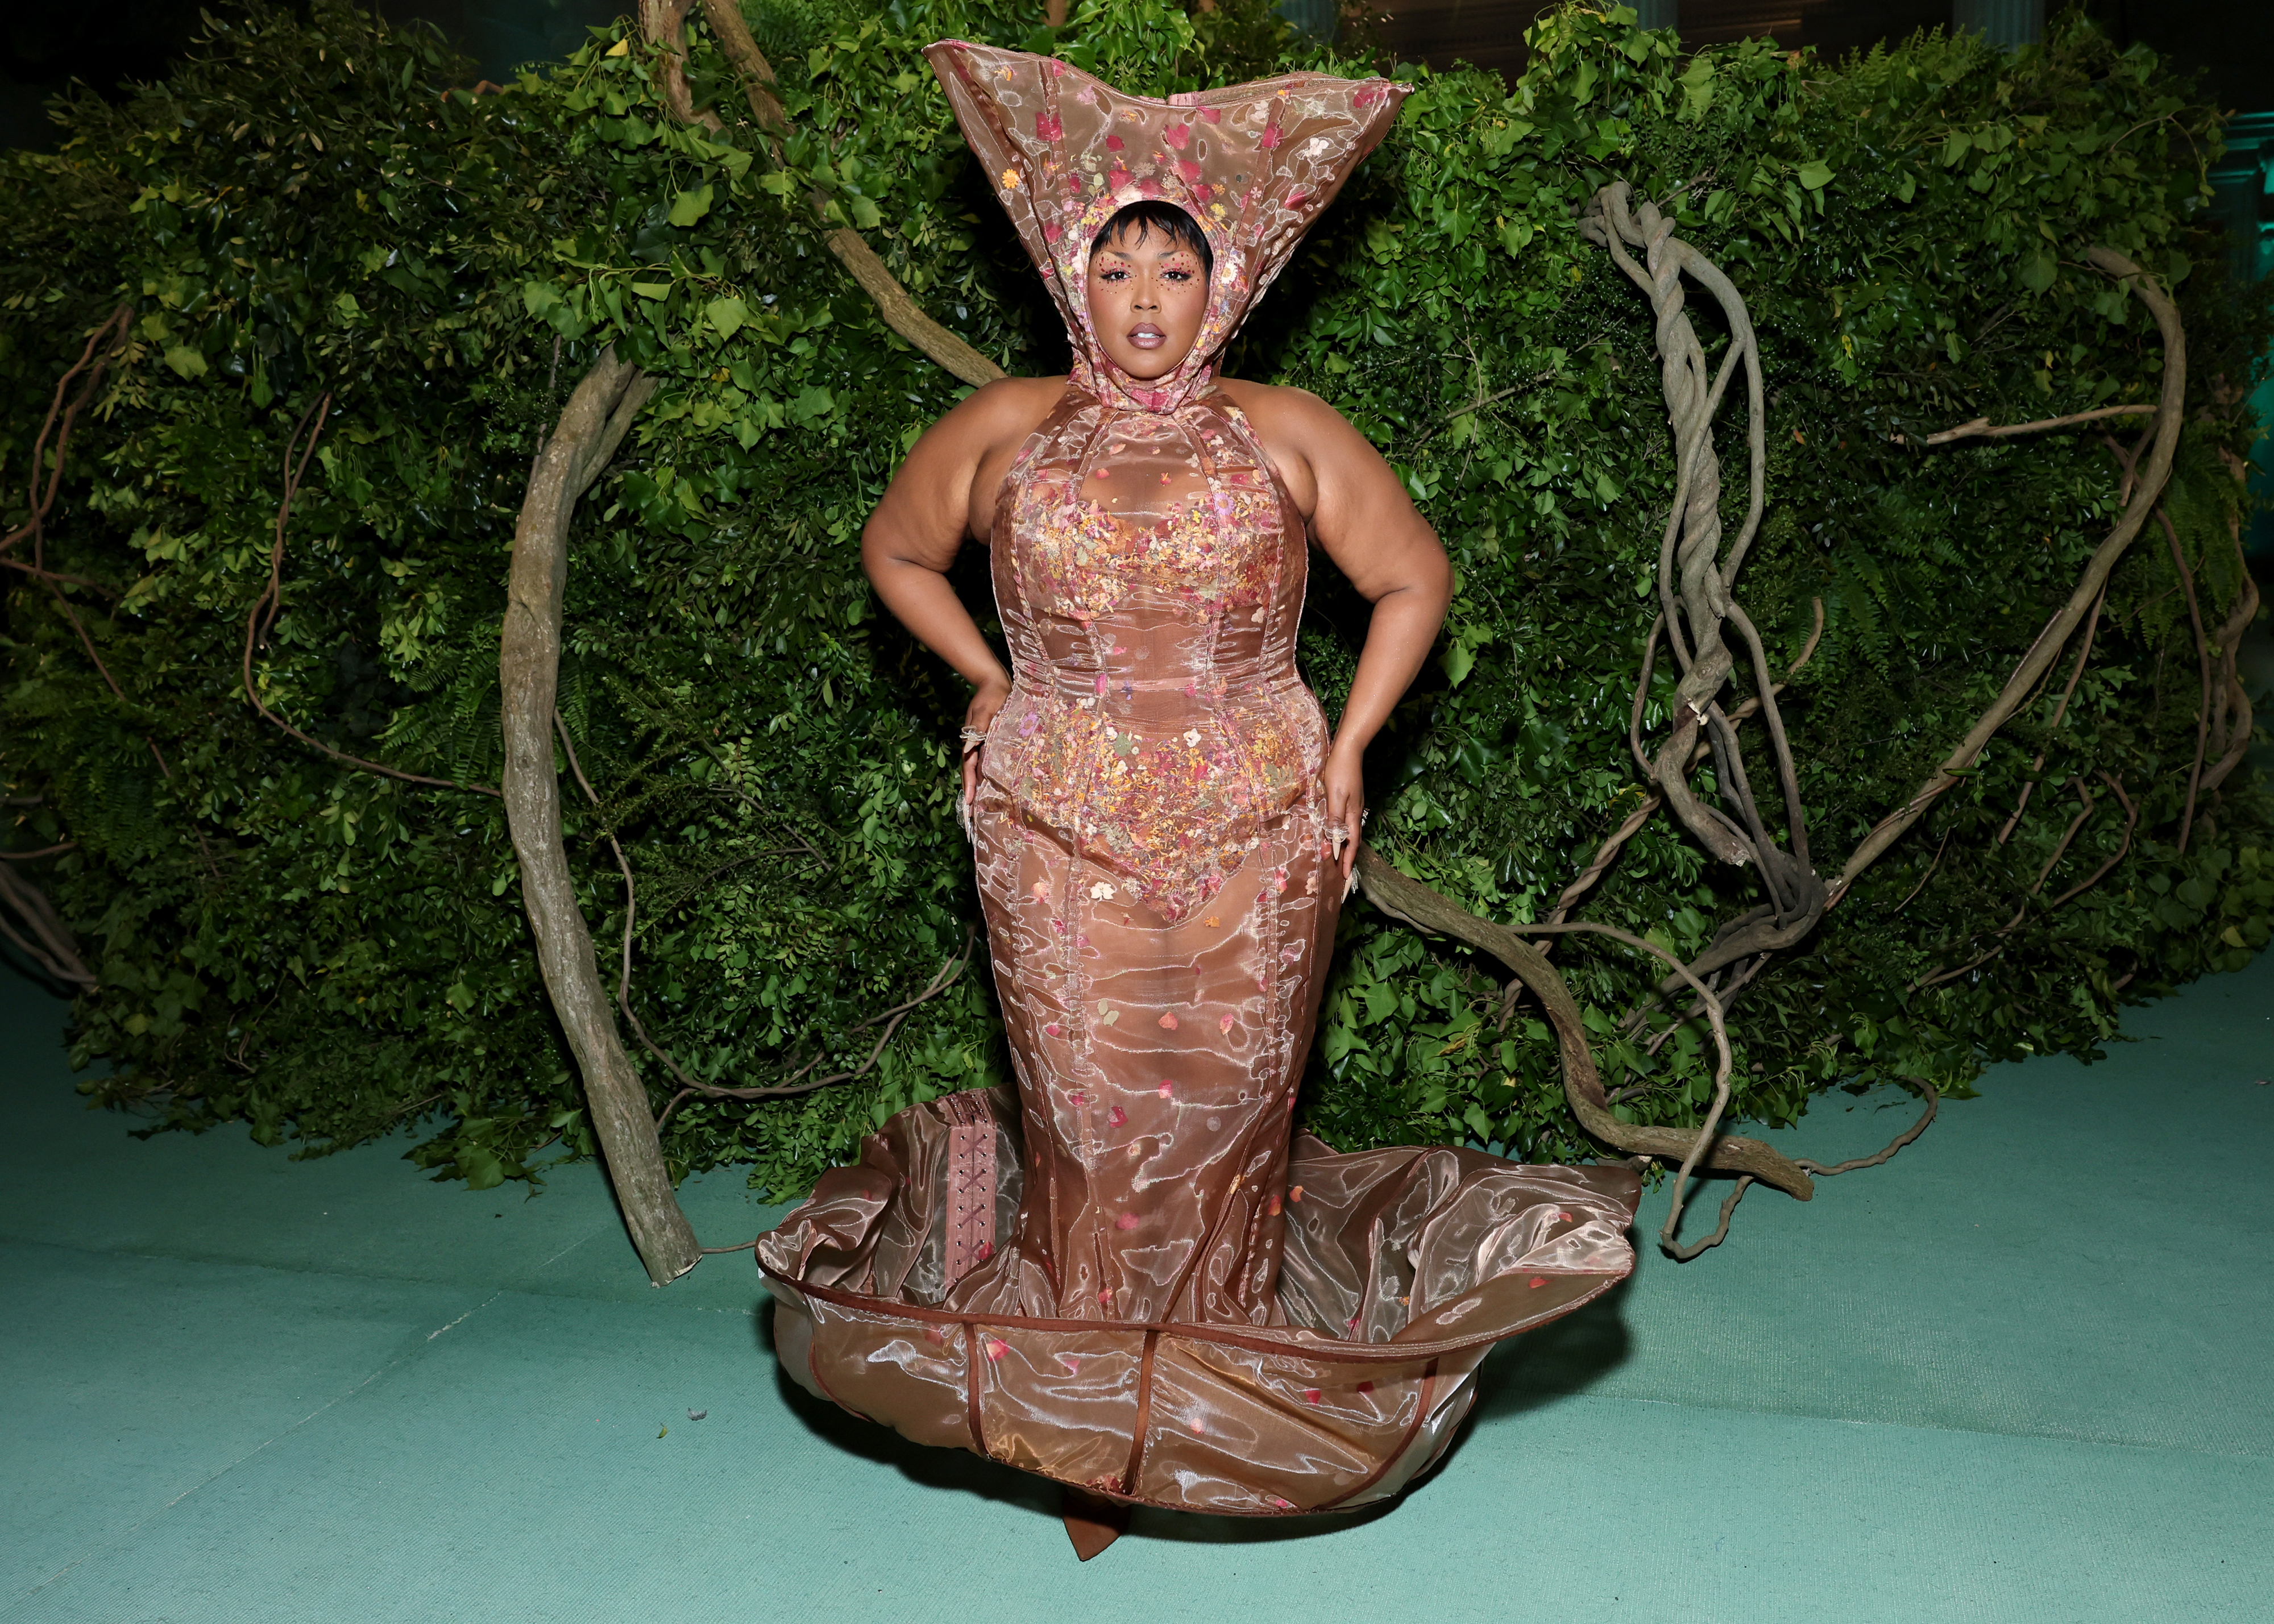 Lizzo wears a figure-hugging shimmering gown with an oversized headpiece at an event